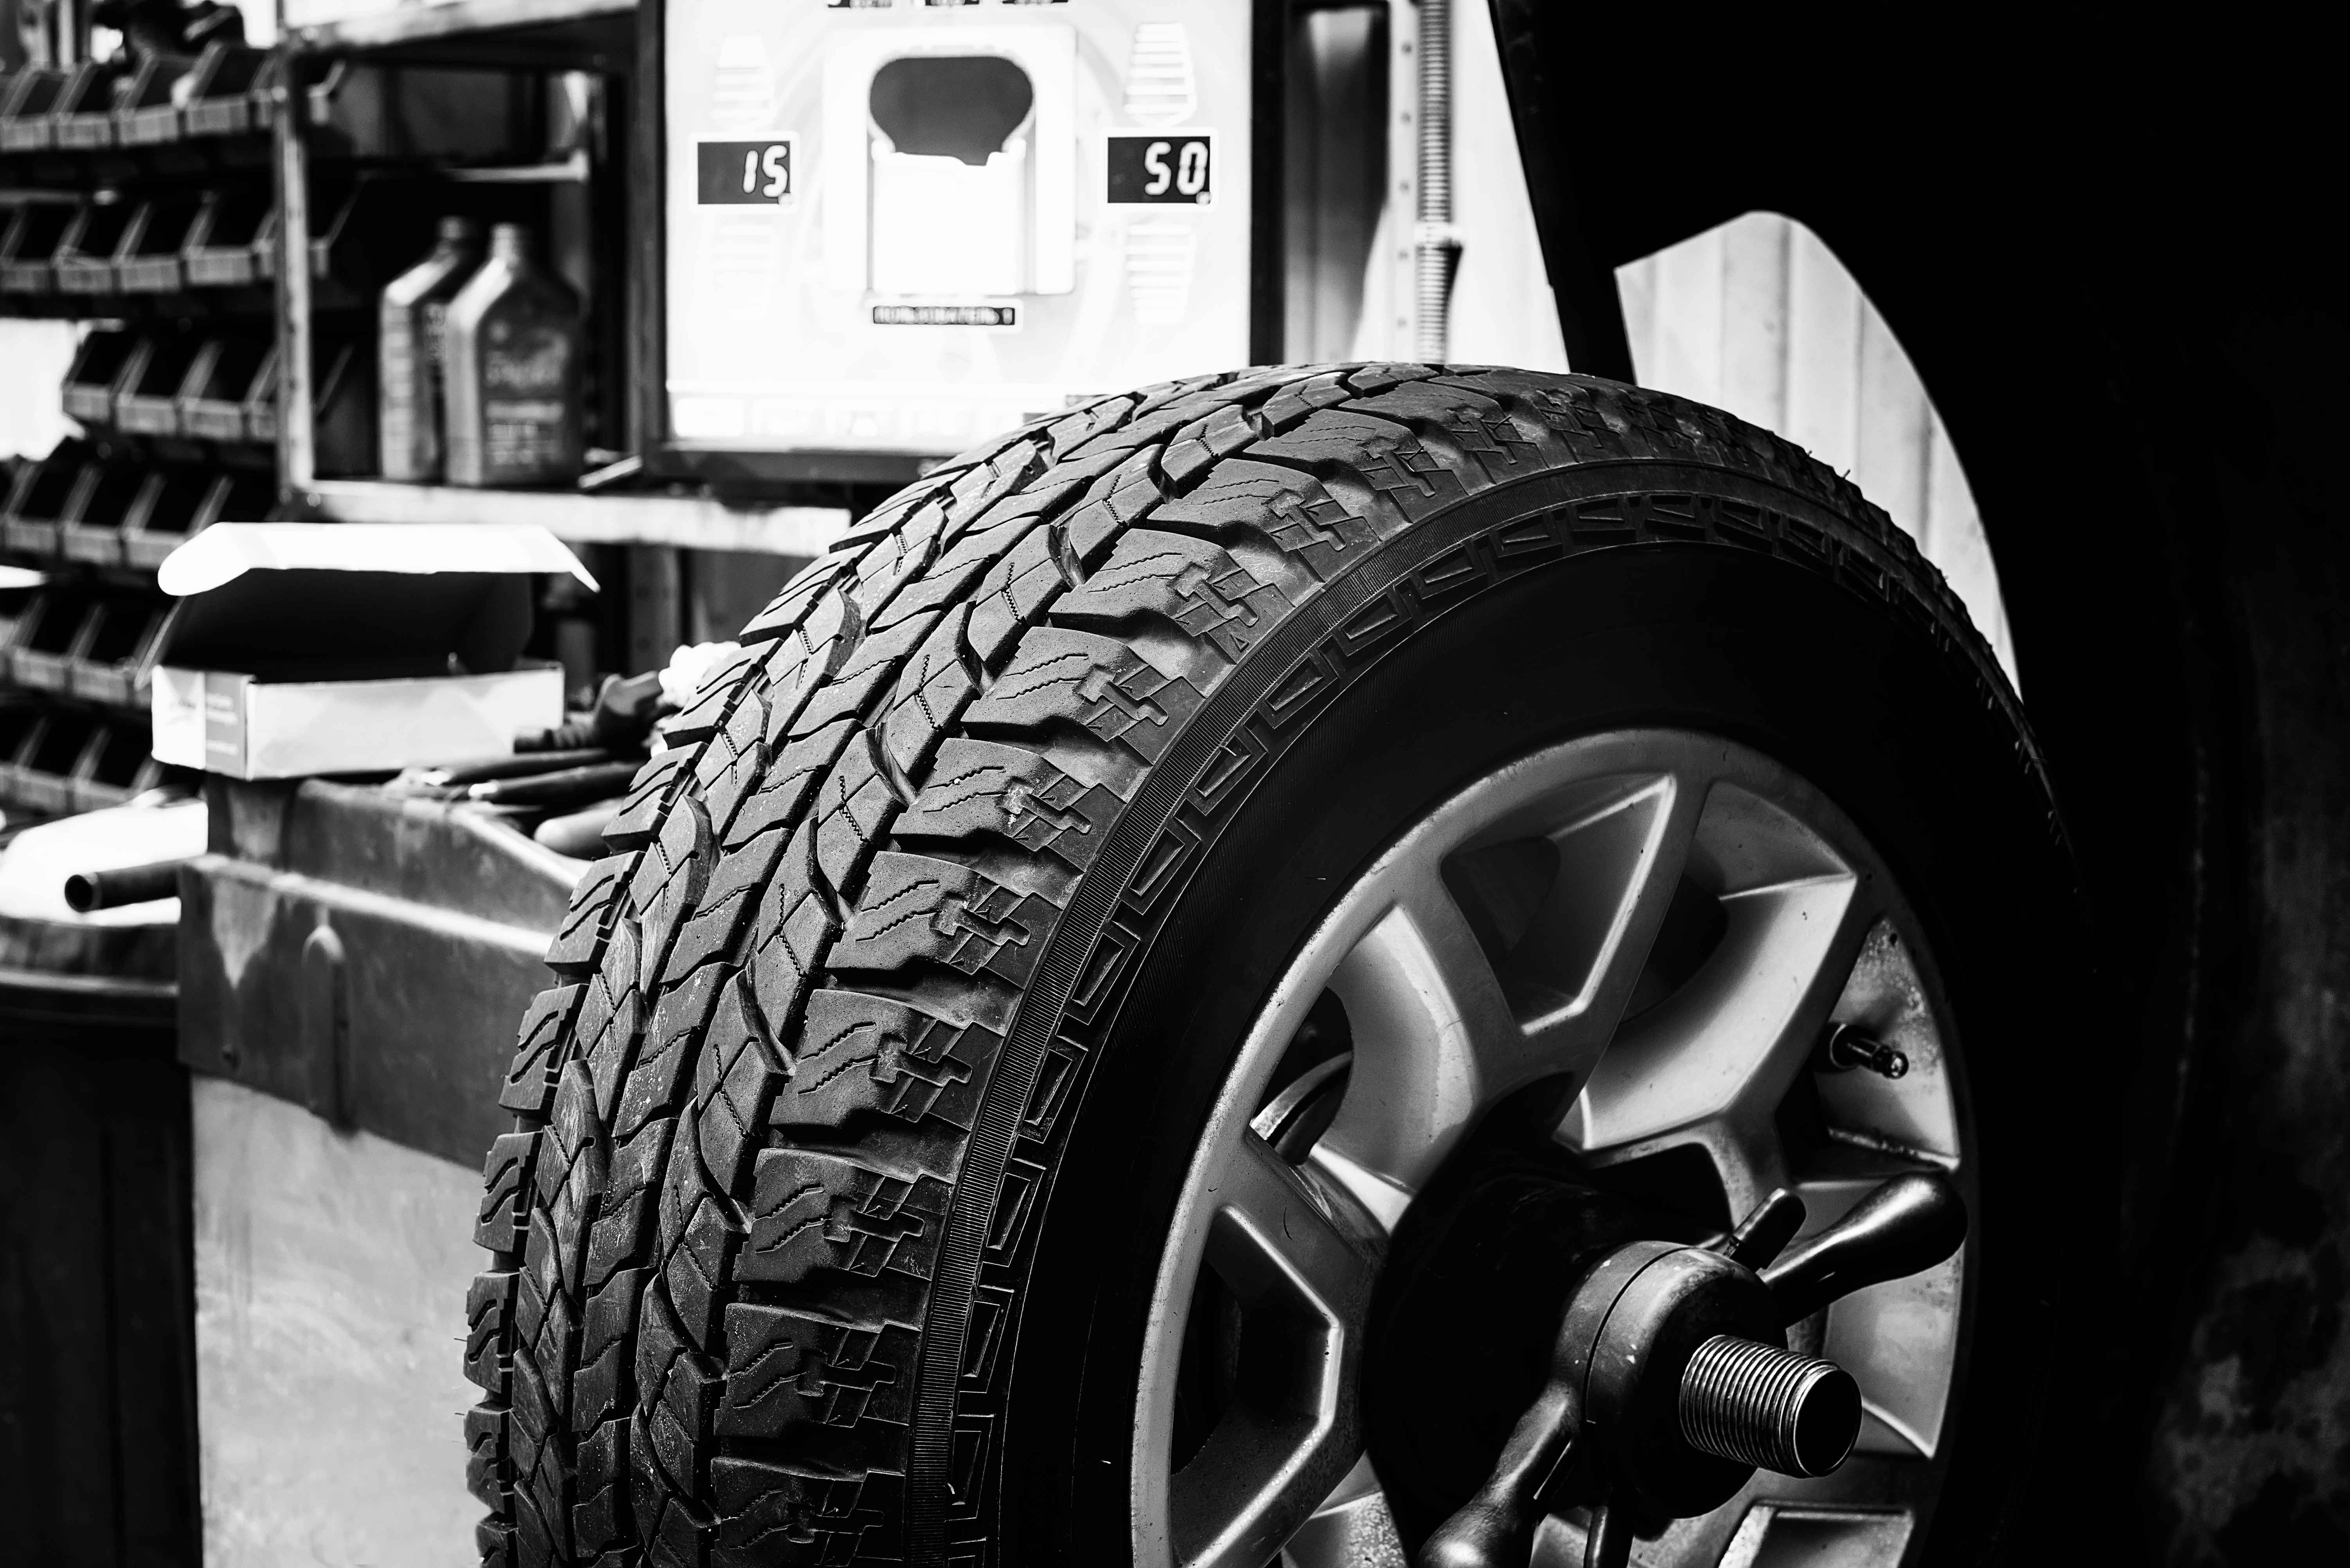 You are in good hands at Tyrepower Kogarah. The team of specialists can balance your tyres and wheels the professional way! cover image